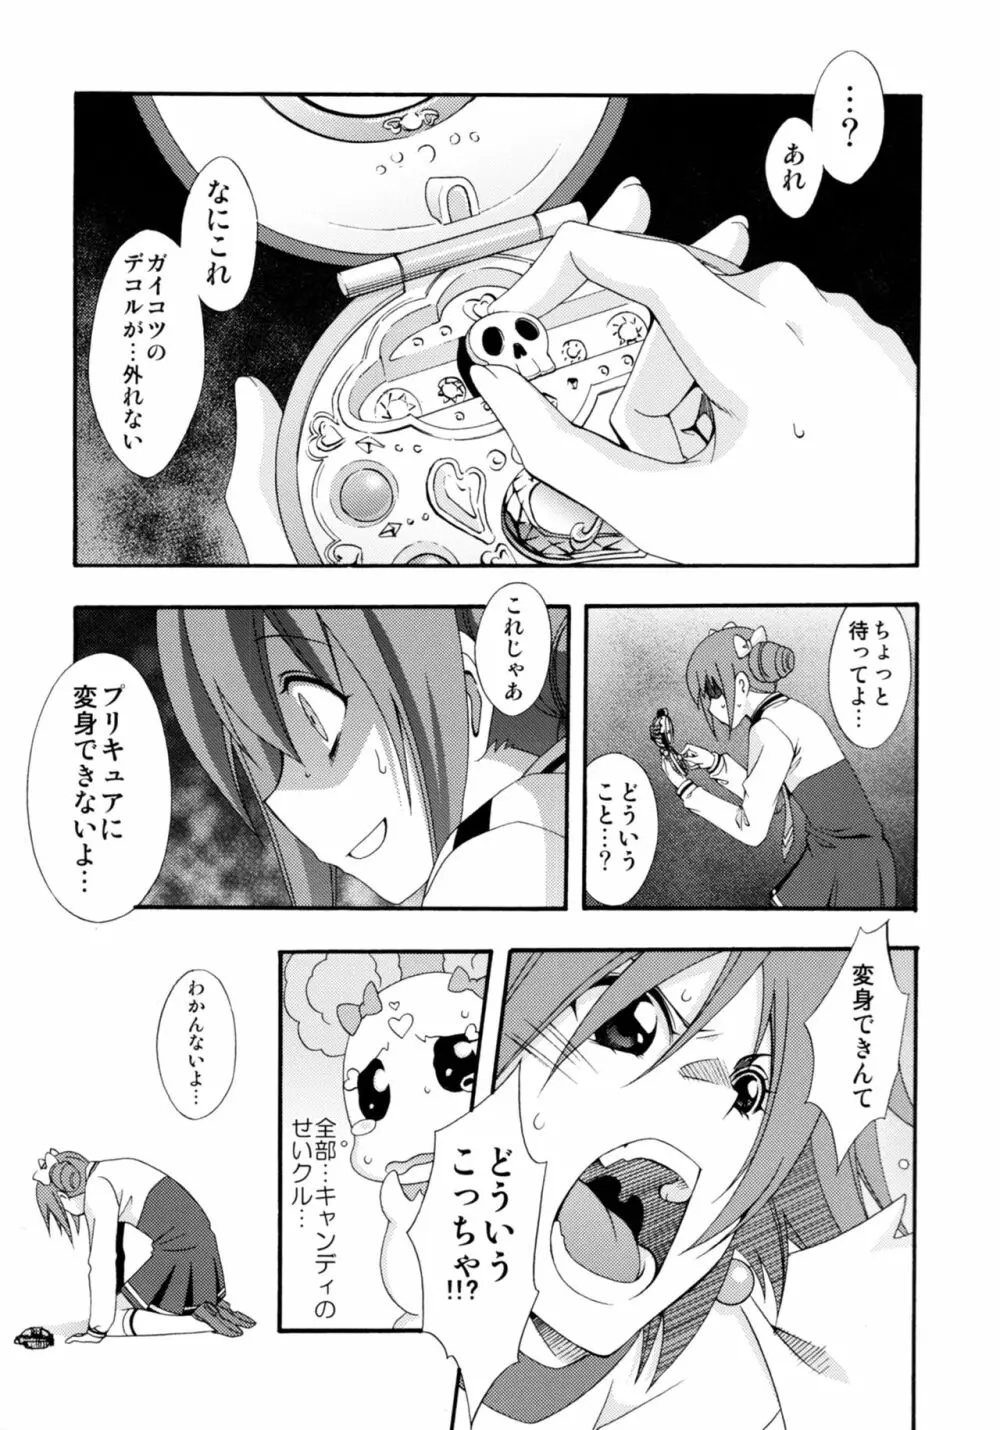 SMILES AND TEARS Vol.01 18ページ